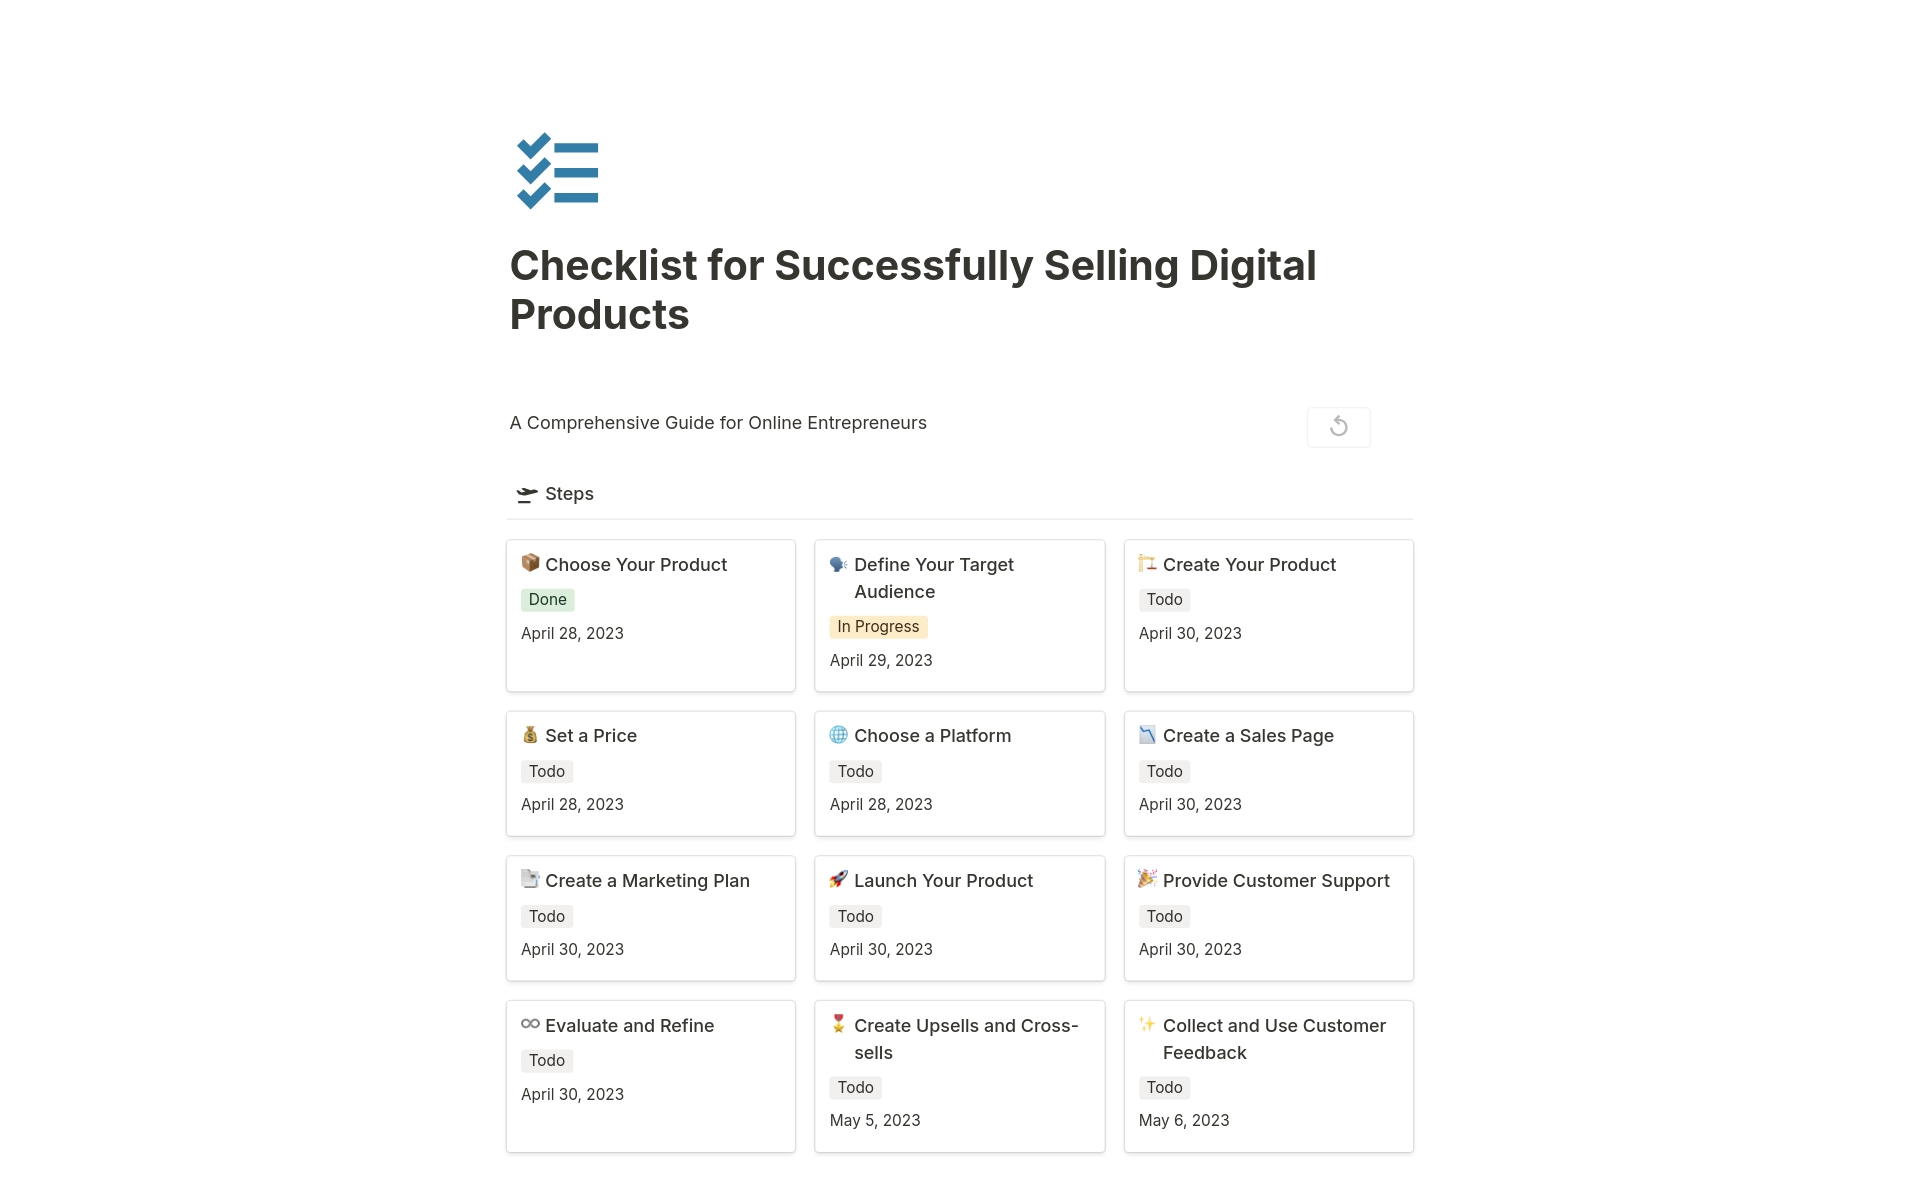 Step into the spotlight of digital product sales with the "Checklist for Successfully Selling Digital Products"!